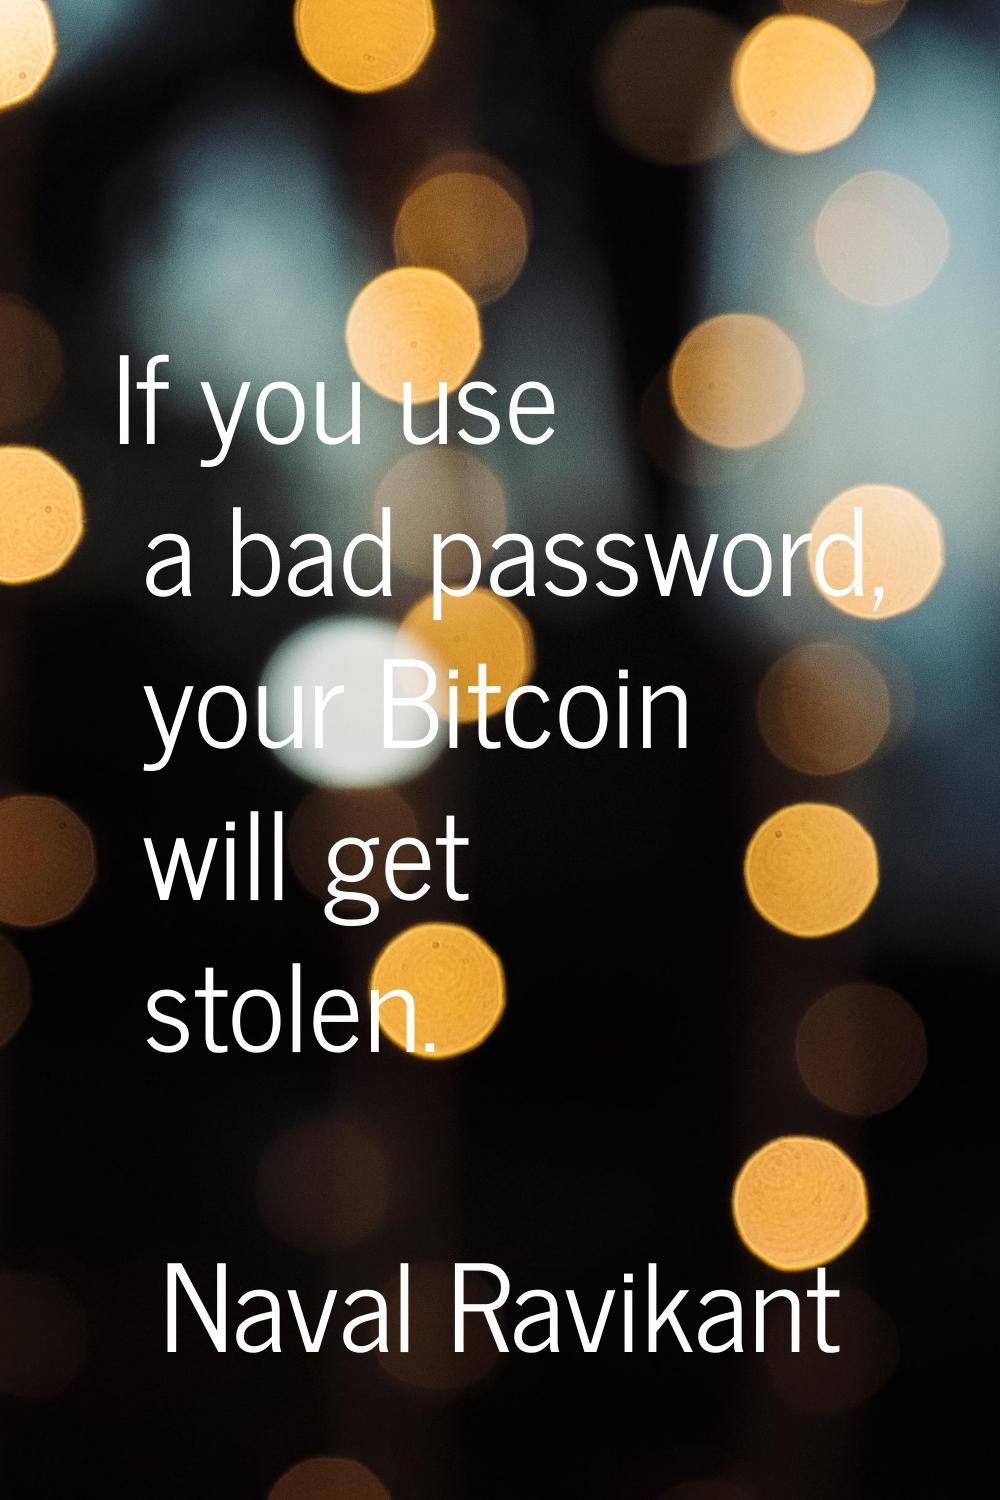 If you use a bad password, your Bitcoin will get stolen.